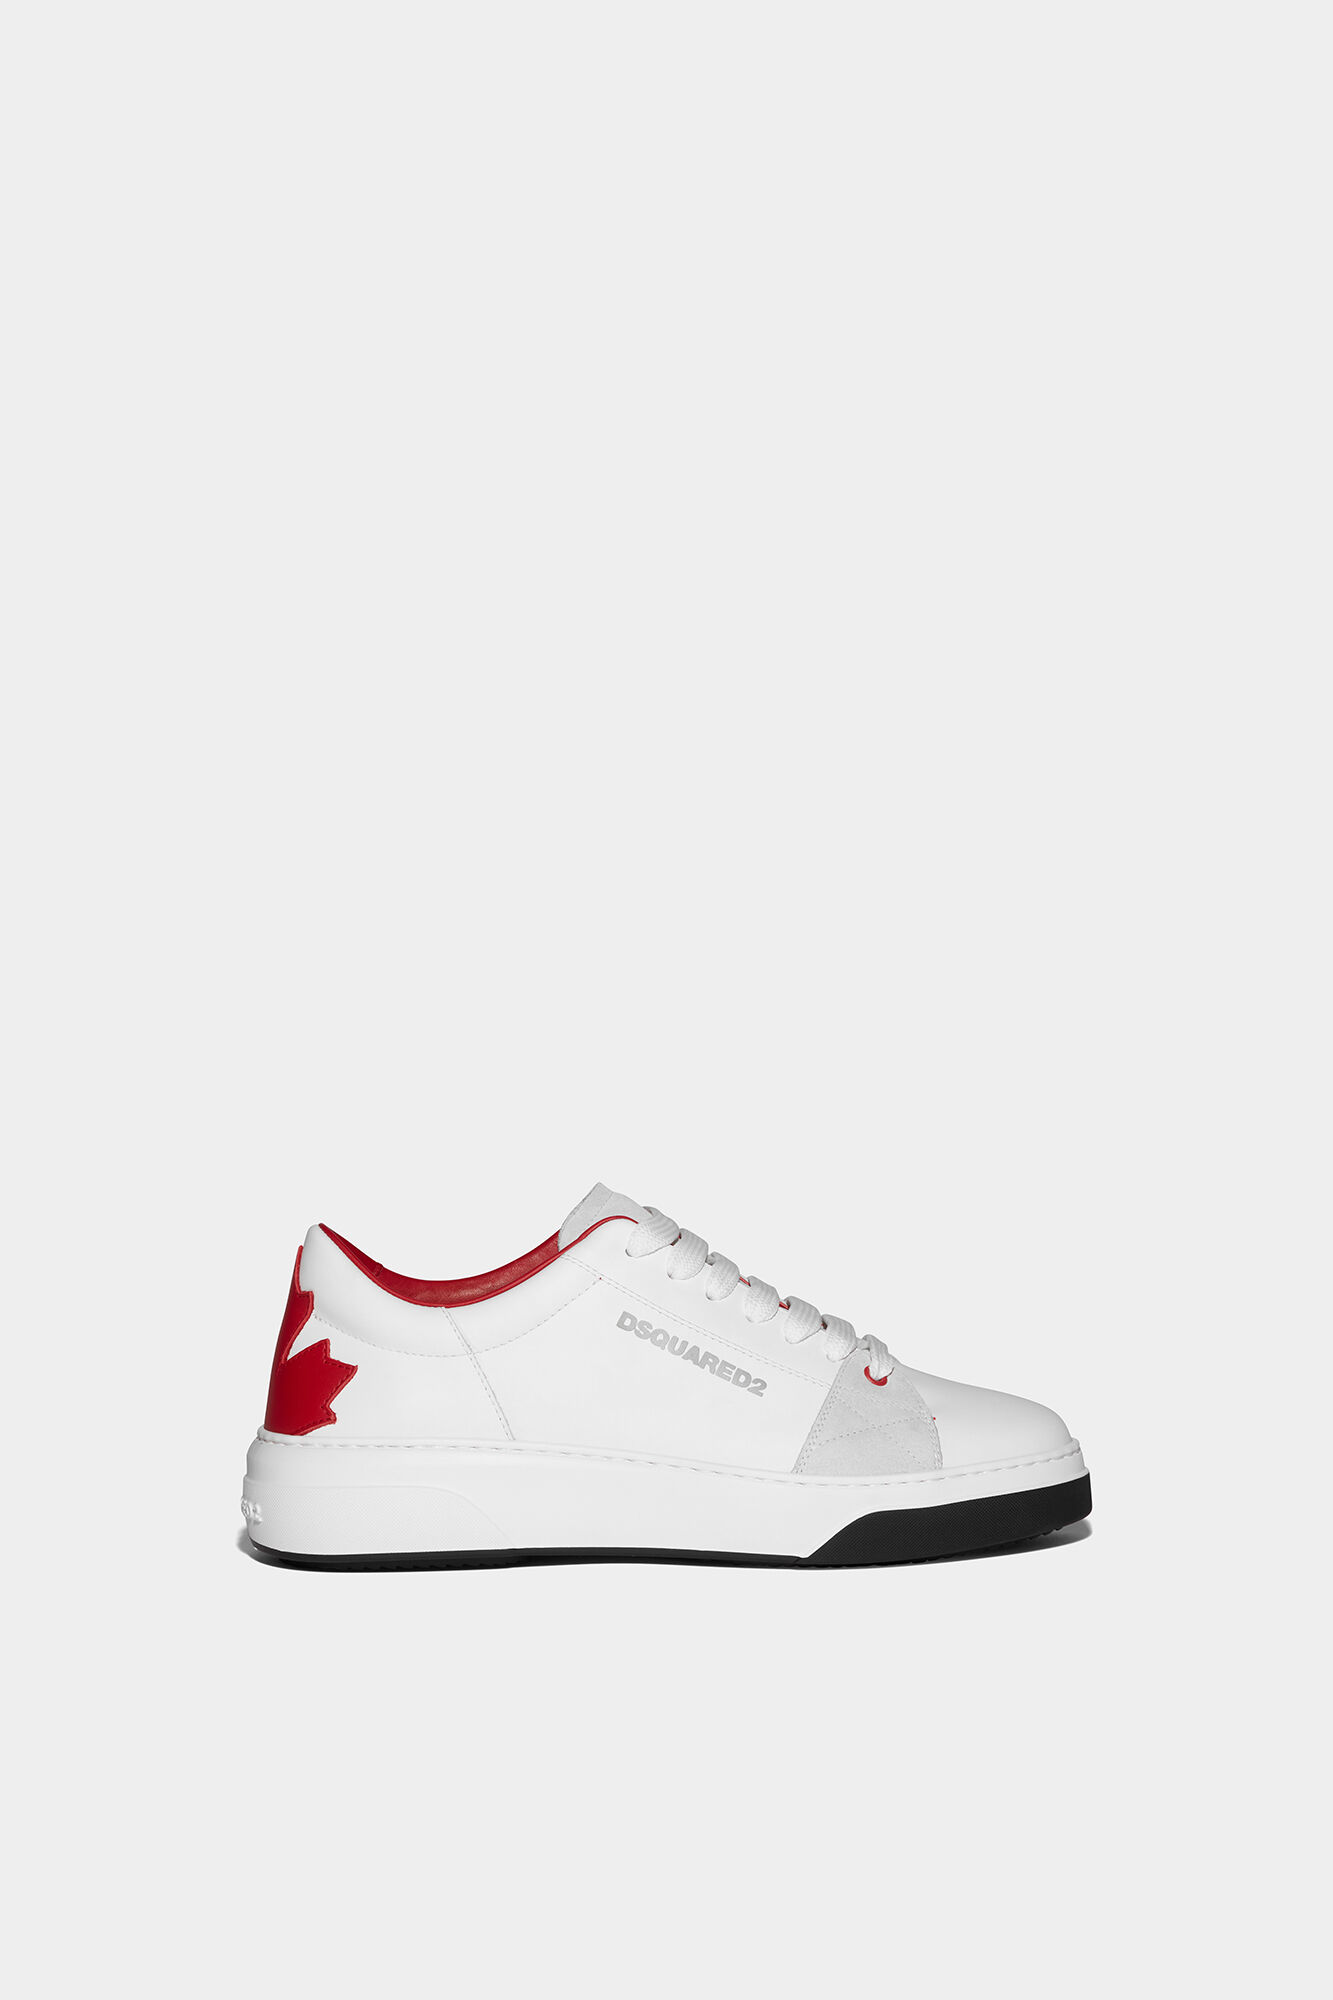 DSQUARED2 Sneakers in white